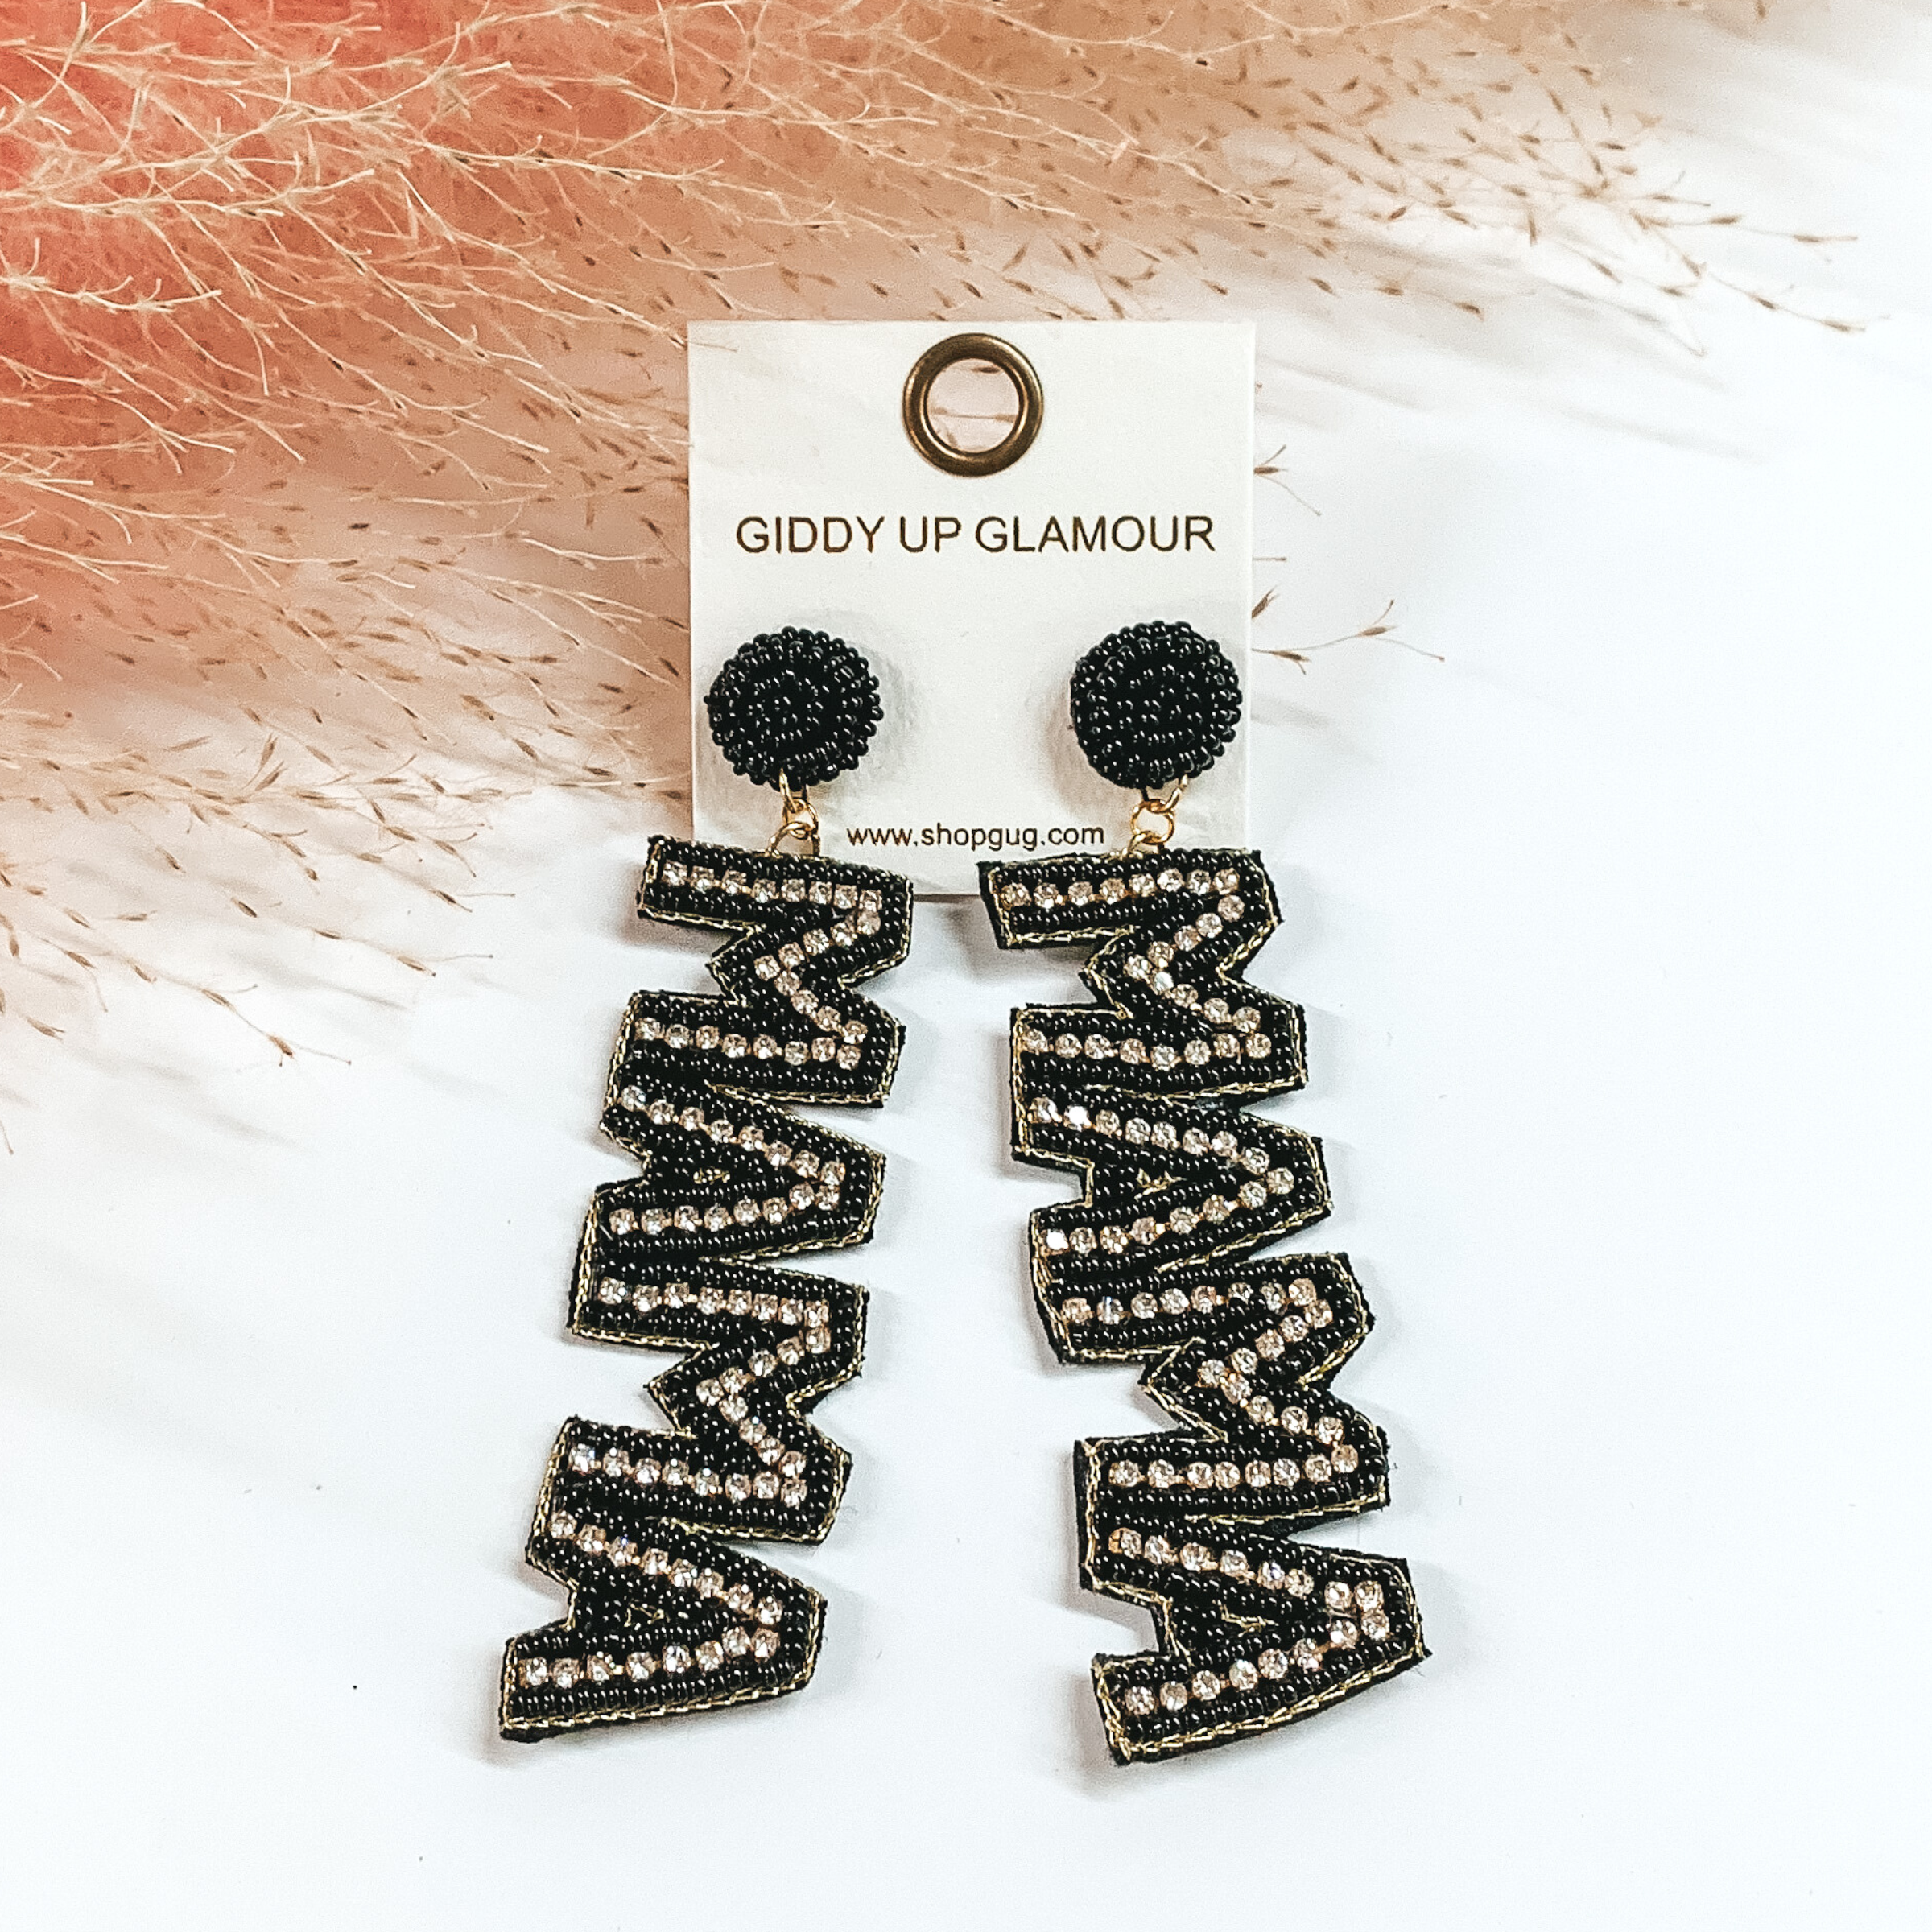 These earrings include black, circle, beaded post back earrings with a long dangle. This dangle spells out "MAMA" in black beads with an inlay of clear crystals. These earrings are pictured on a white background with pink pompous grass at the top. 